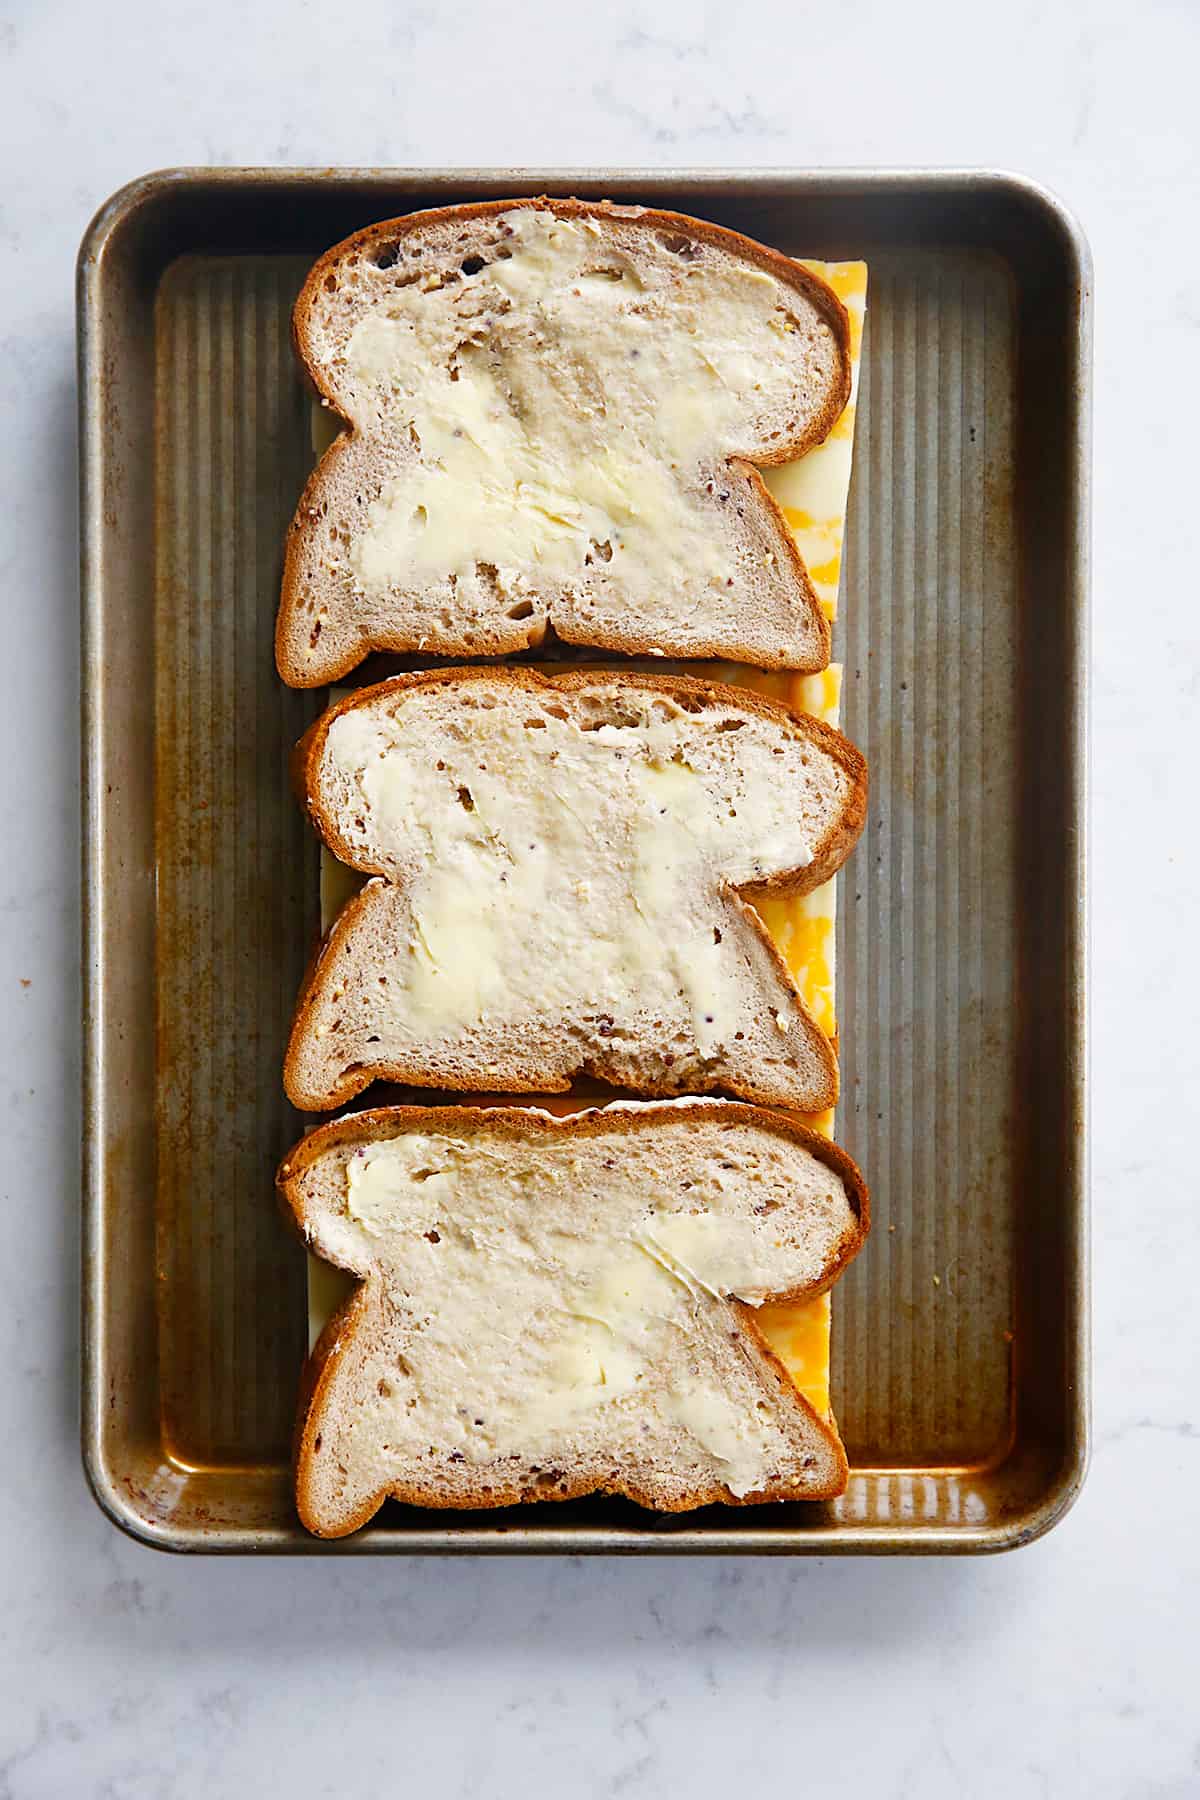 unbaked cheese sandwiches on a sheet pan.